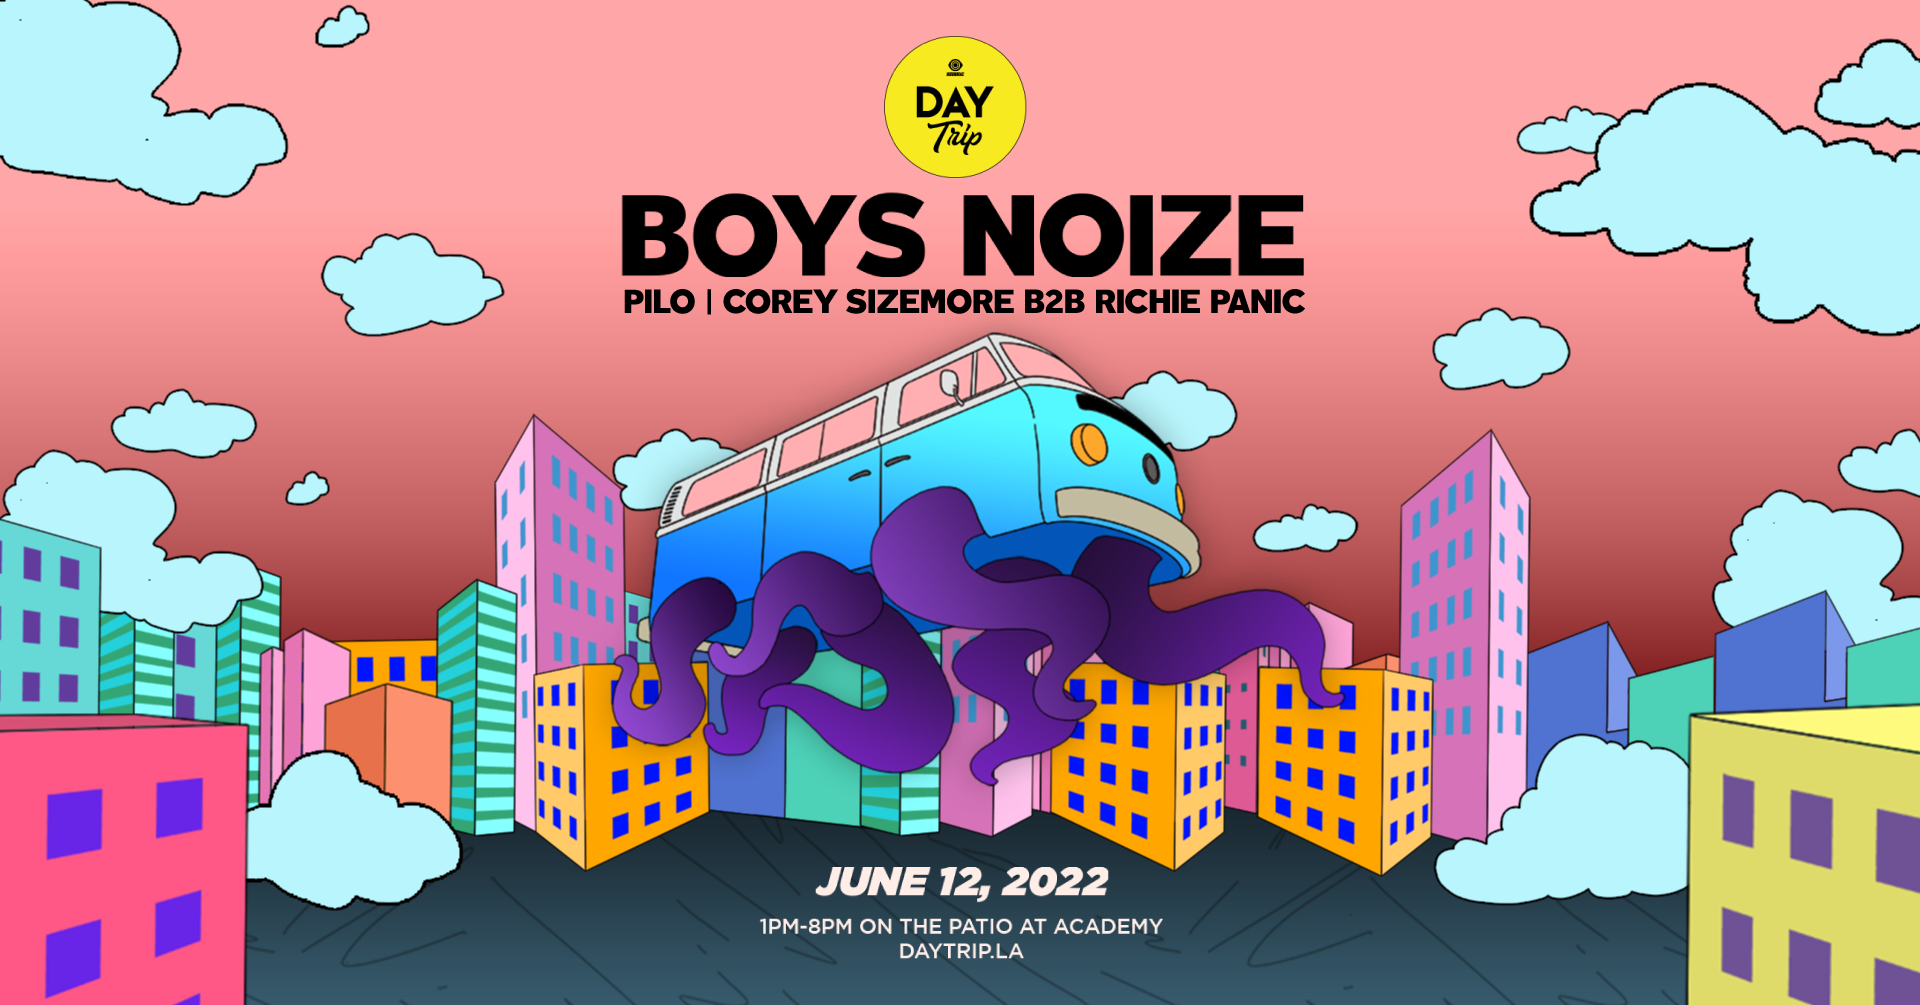 Day Trip feat. Boys Noize - フライヤー表